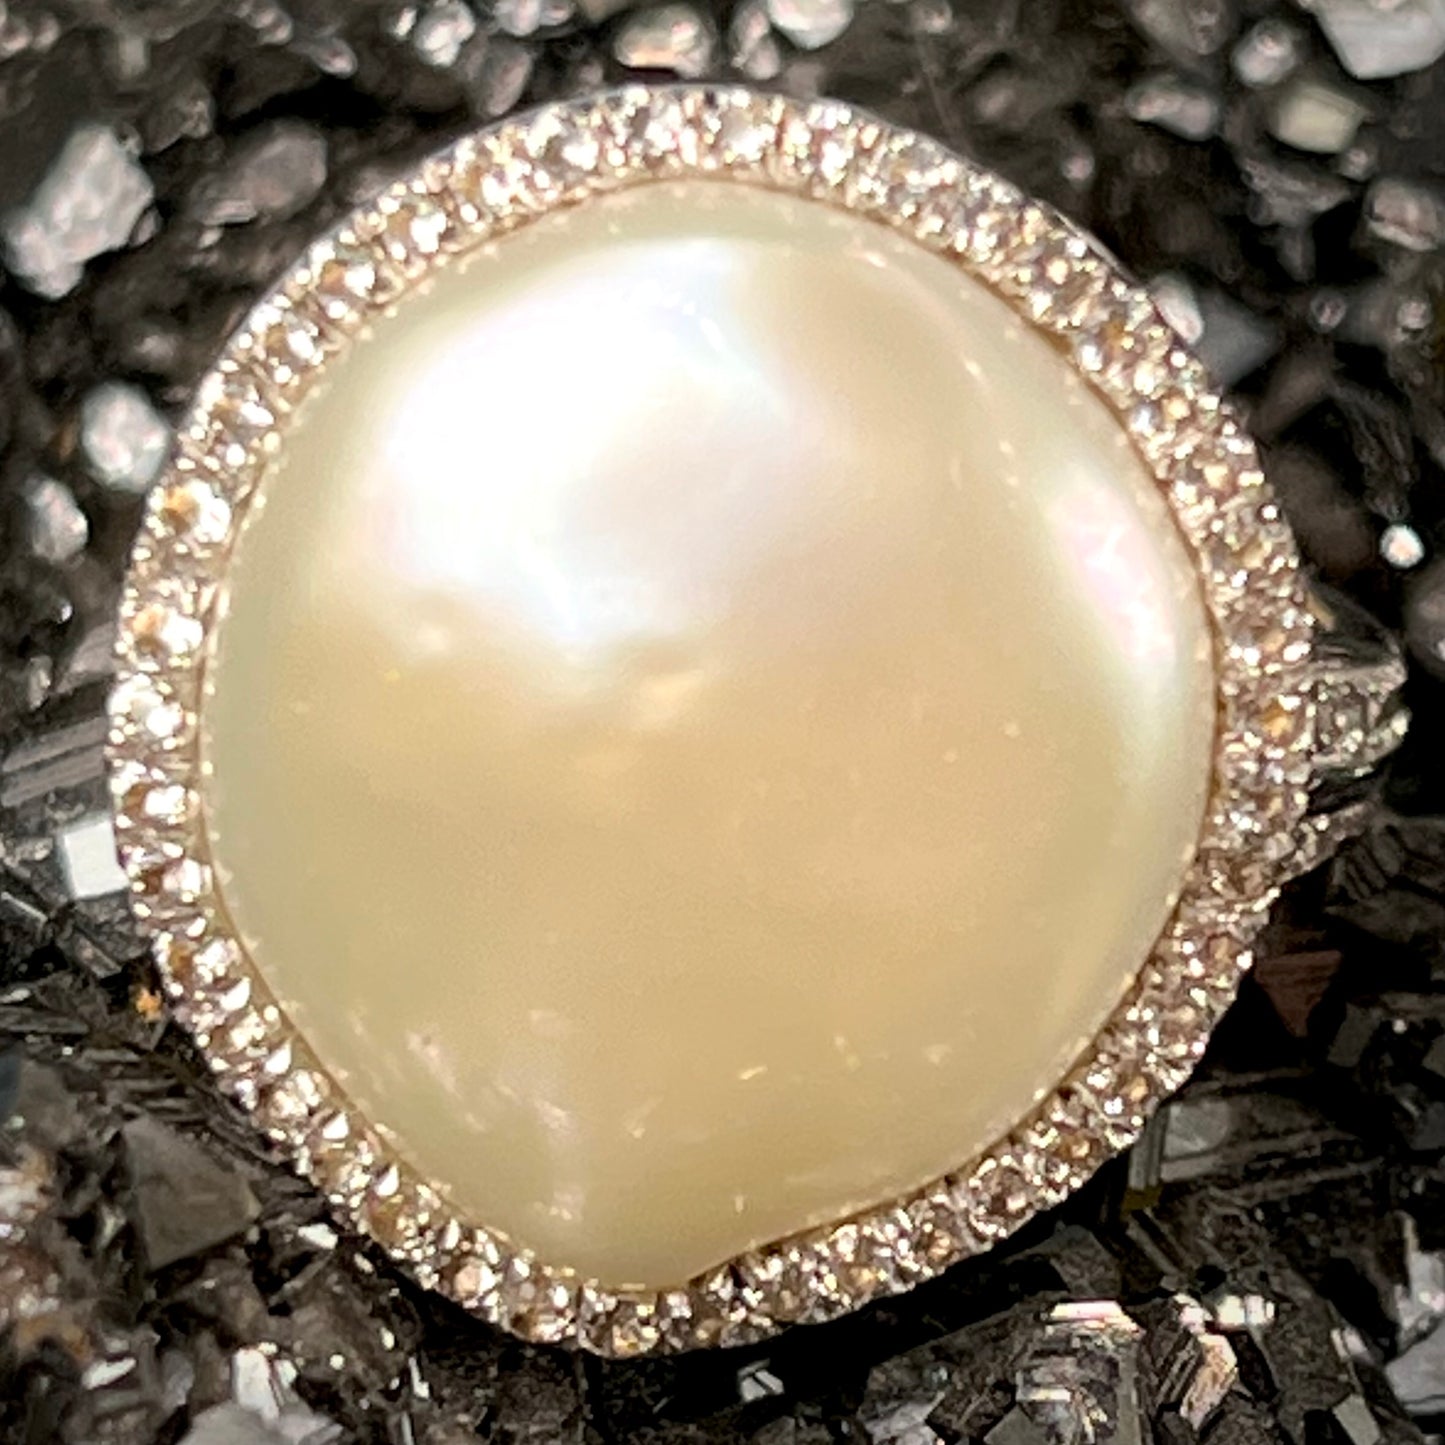 Freshwater Button Pearl Ring | Sterling Silver